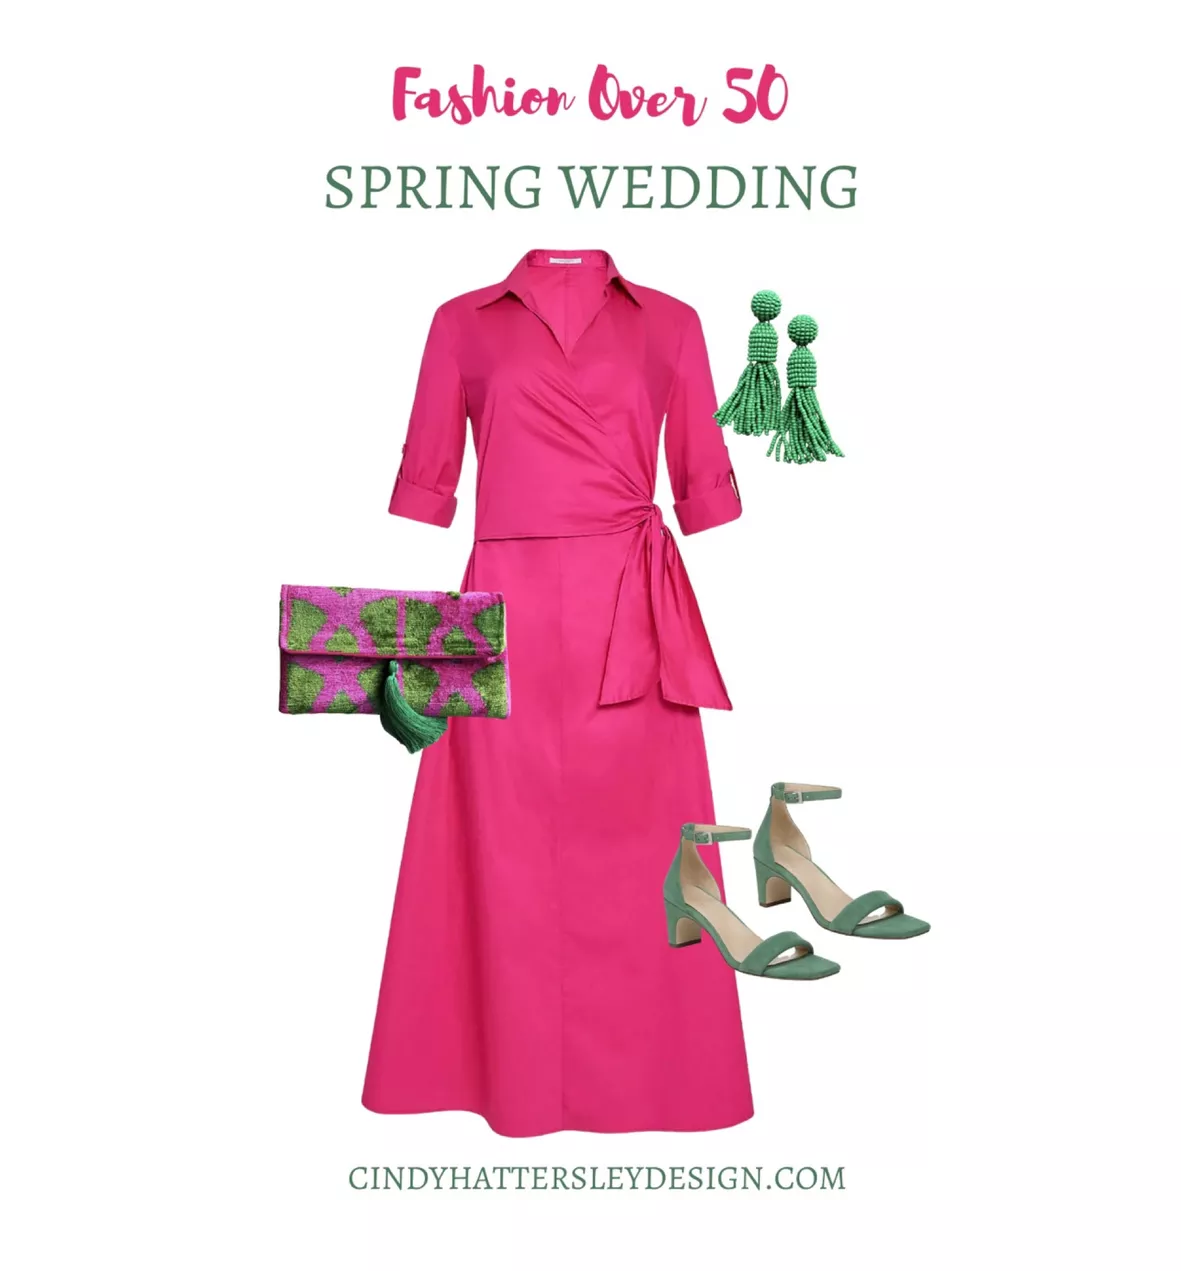 Spring Weddings and Wearing Pants for Women over 50